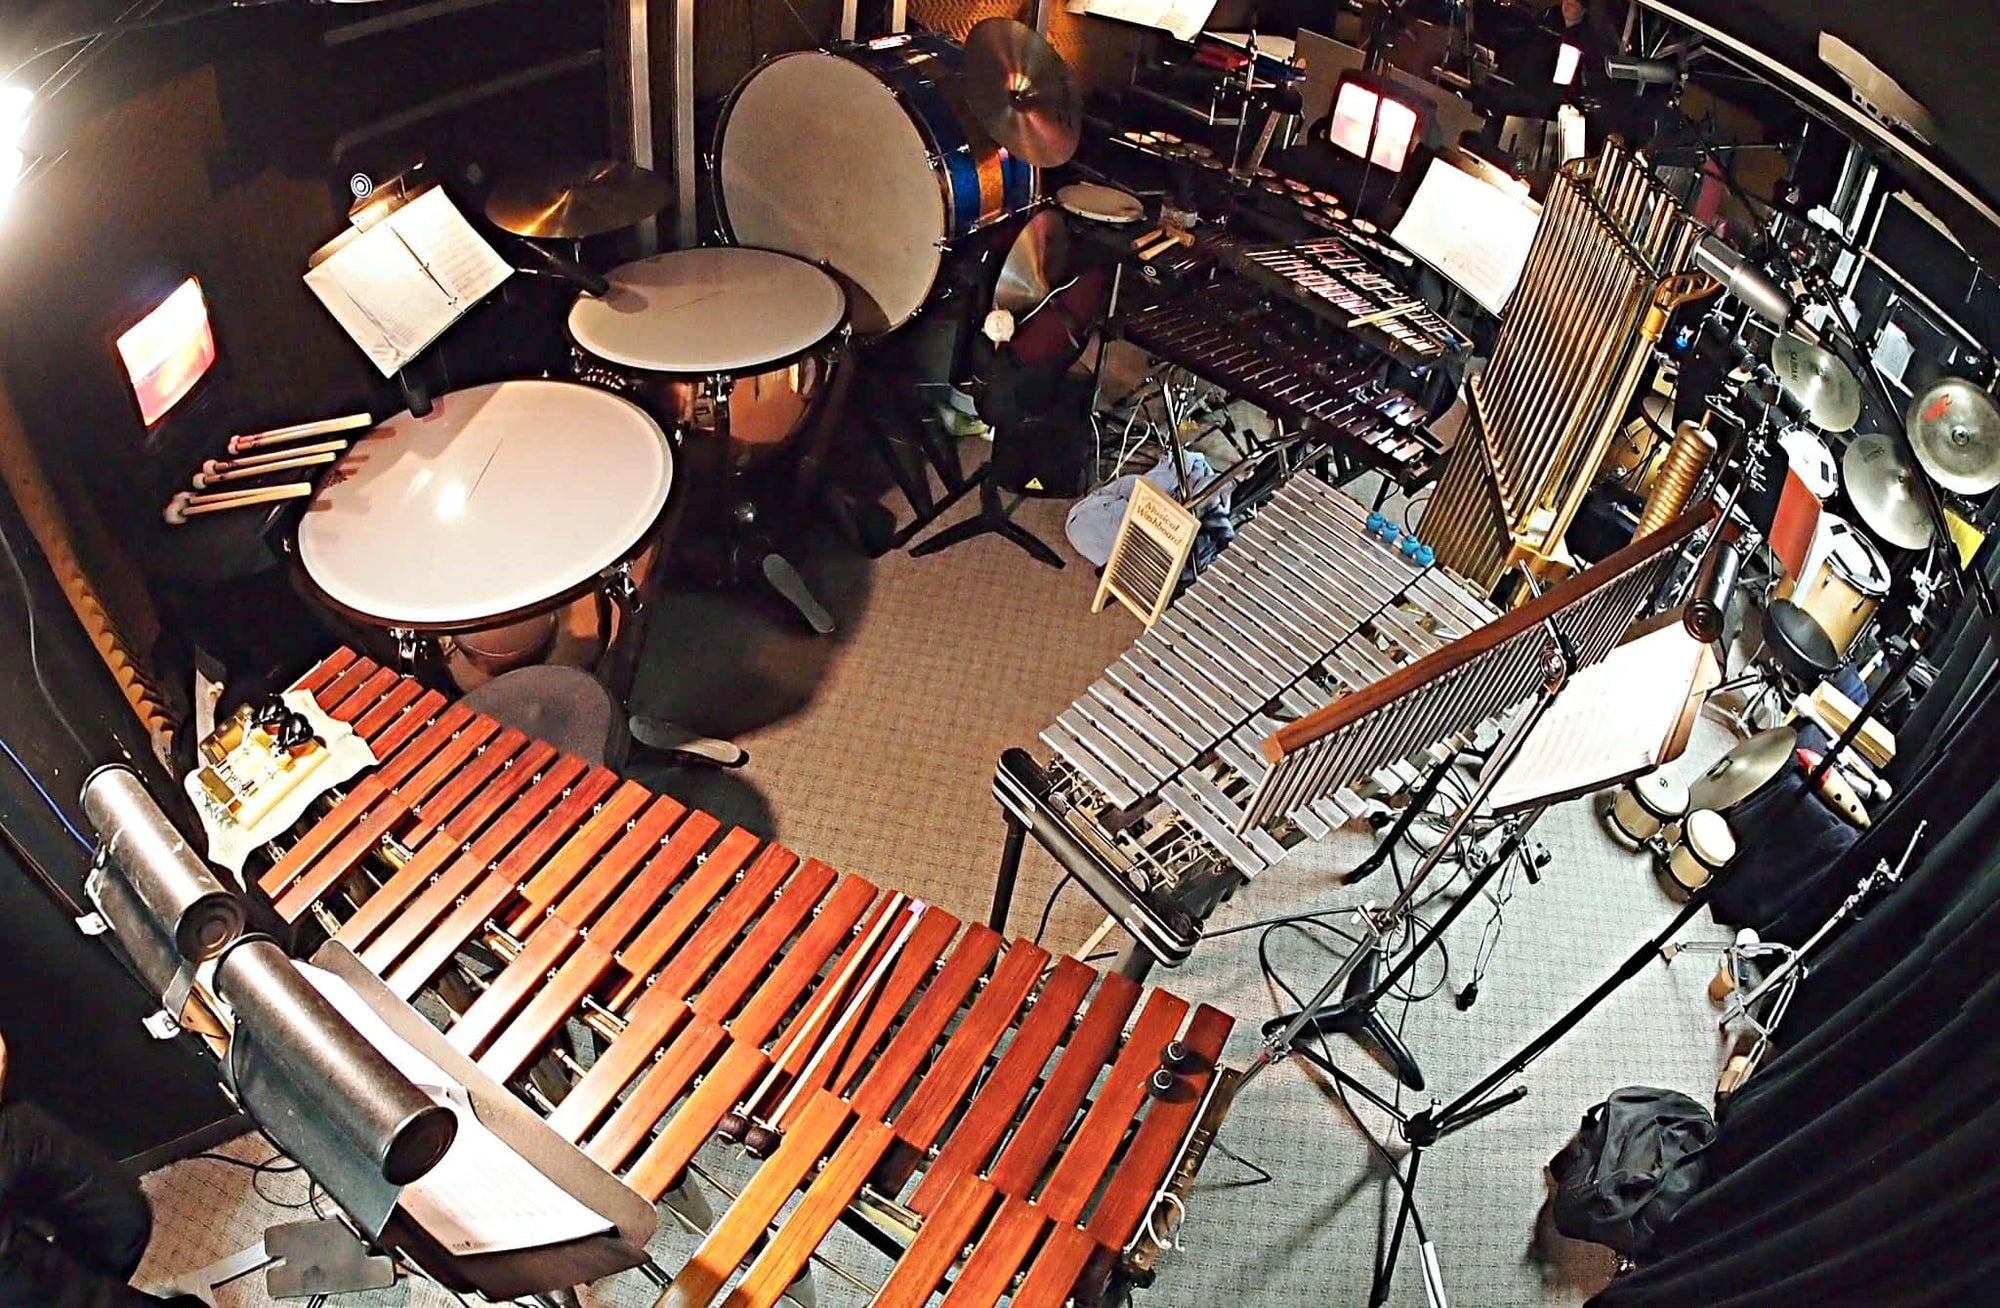 Alec Wilmart's percussion setup for Mary Poppins at the Village Theatre in Everett, Washington.